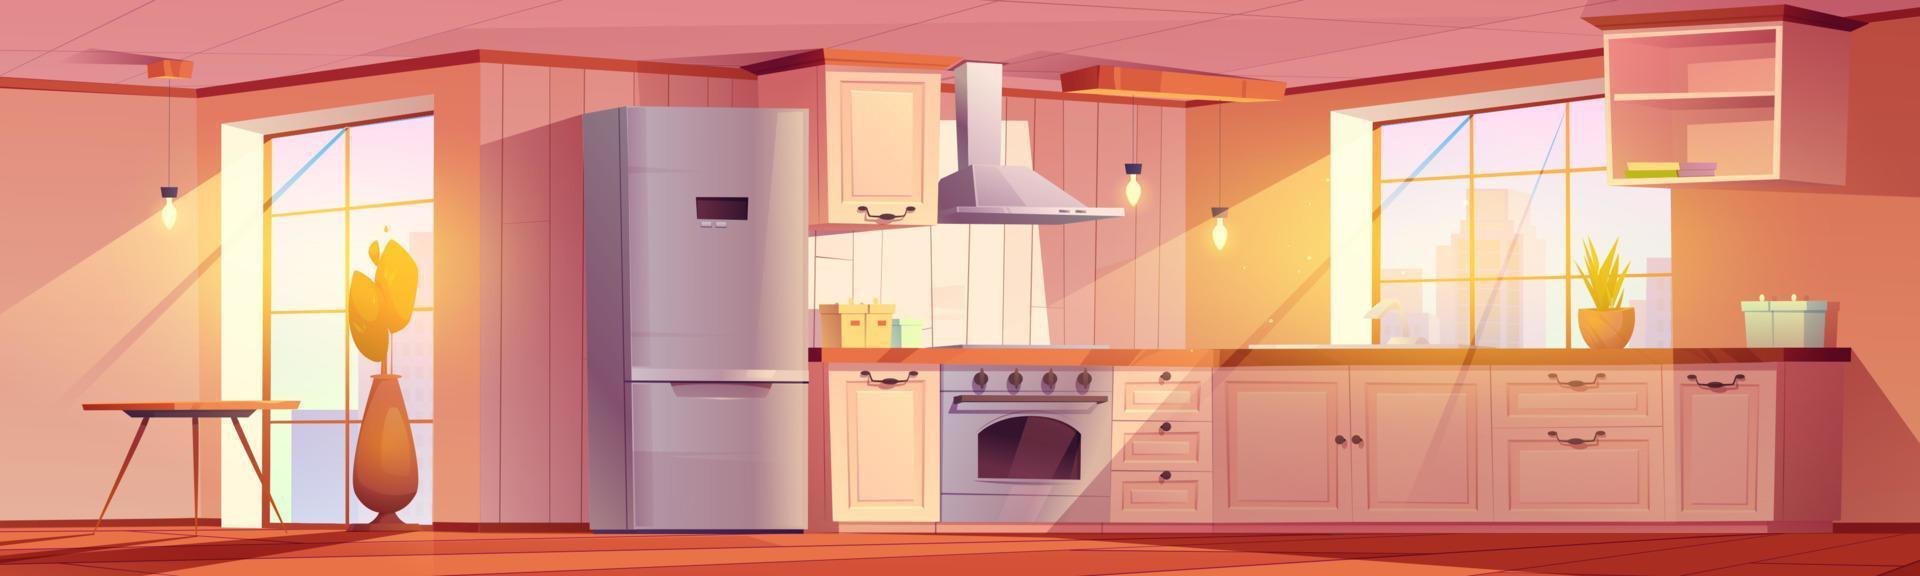 Kitchen interior with dining table, fridge, stove vector